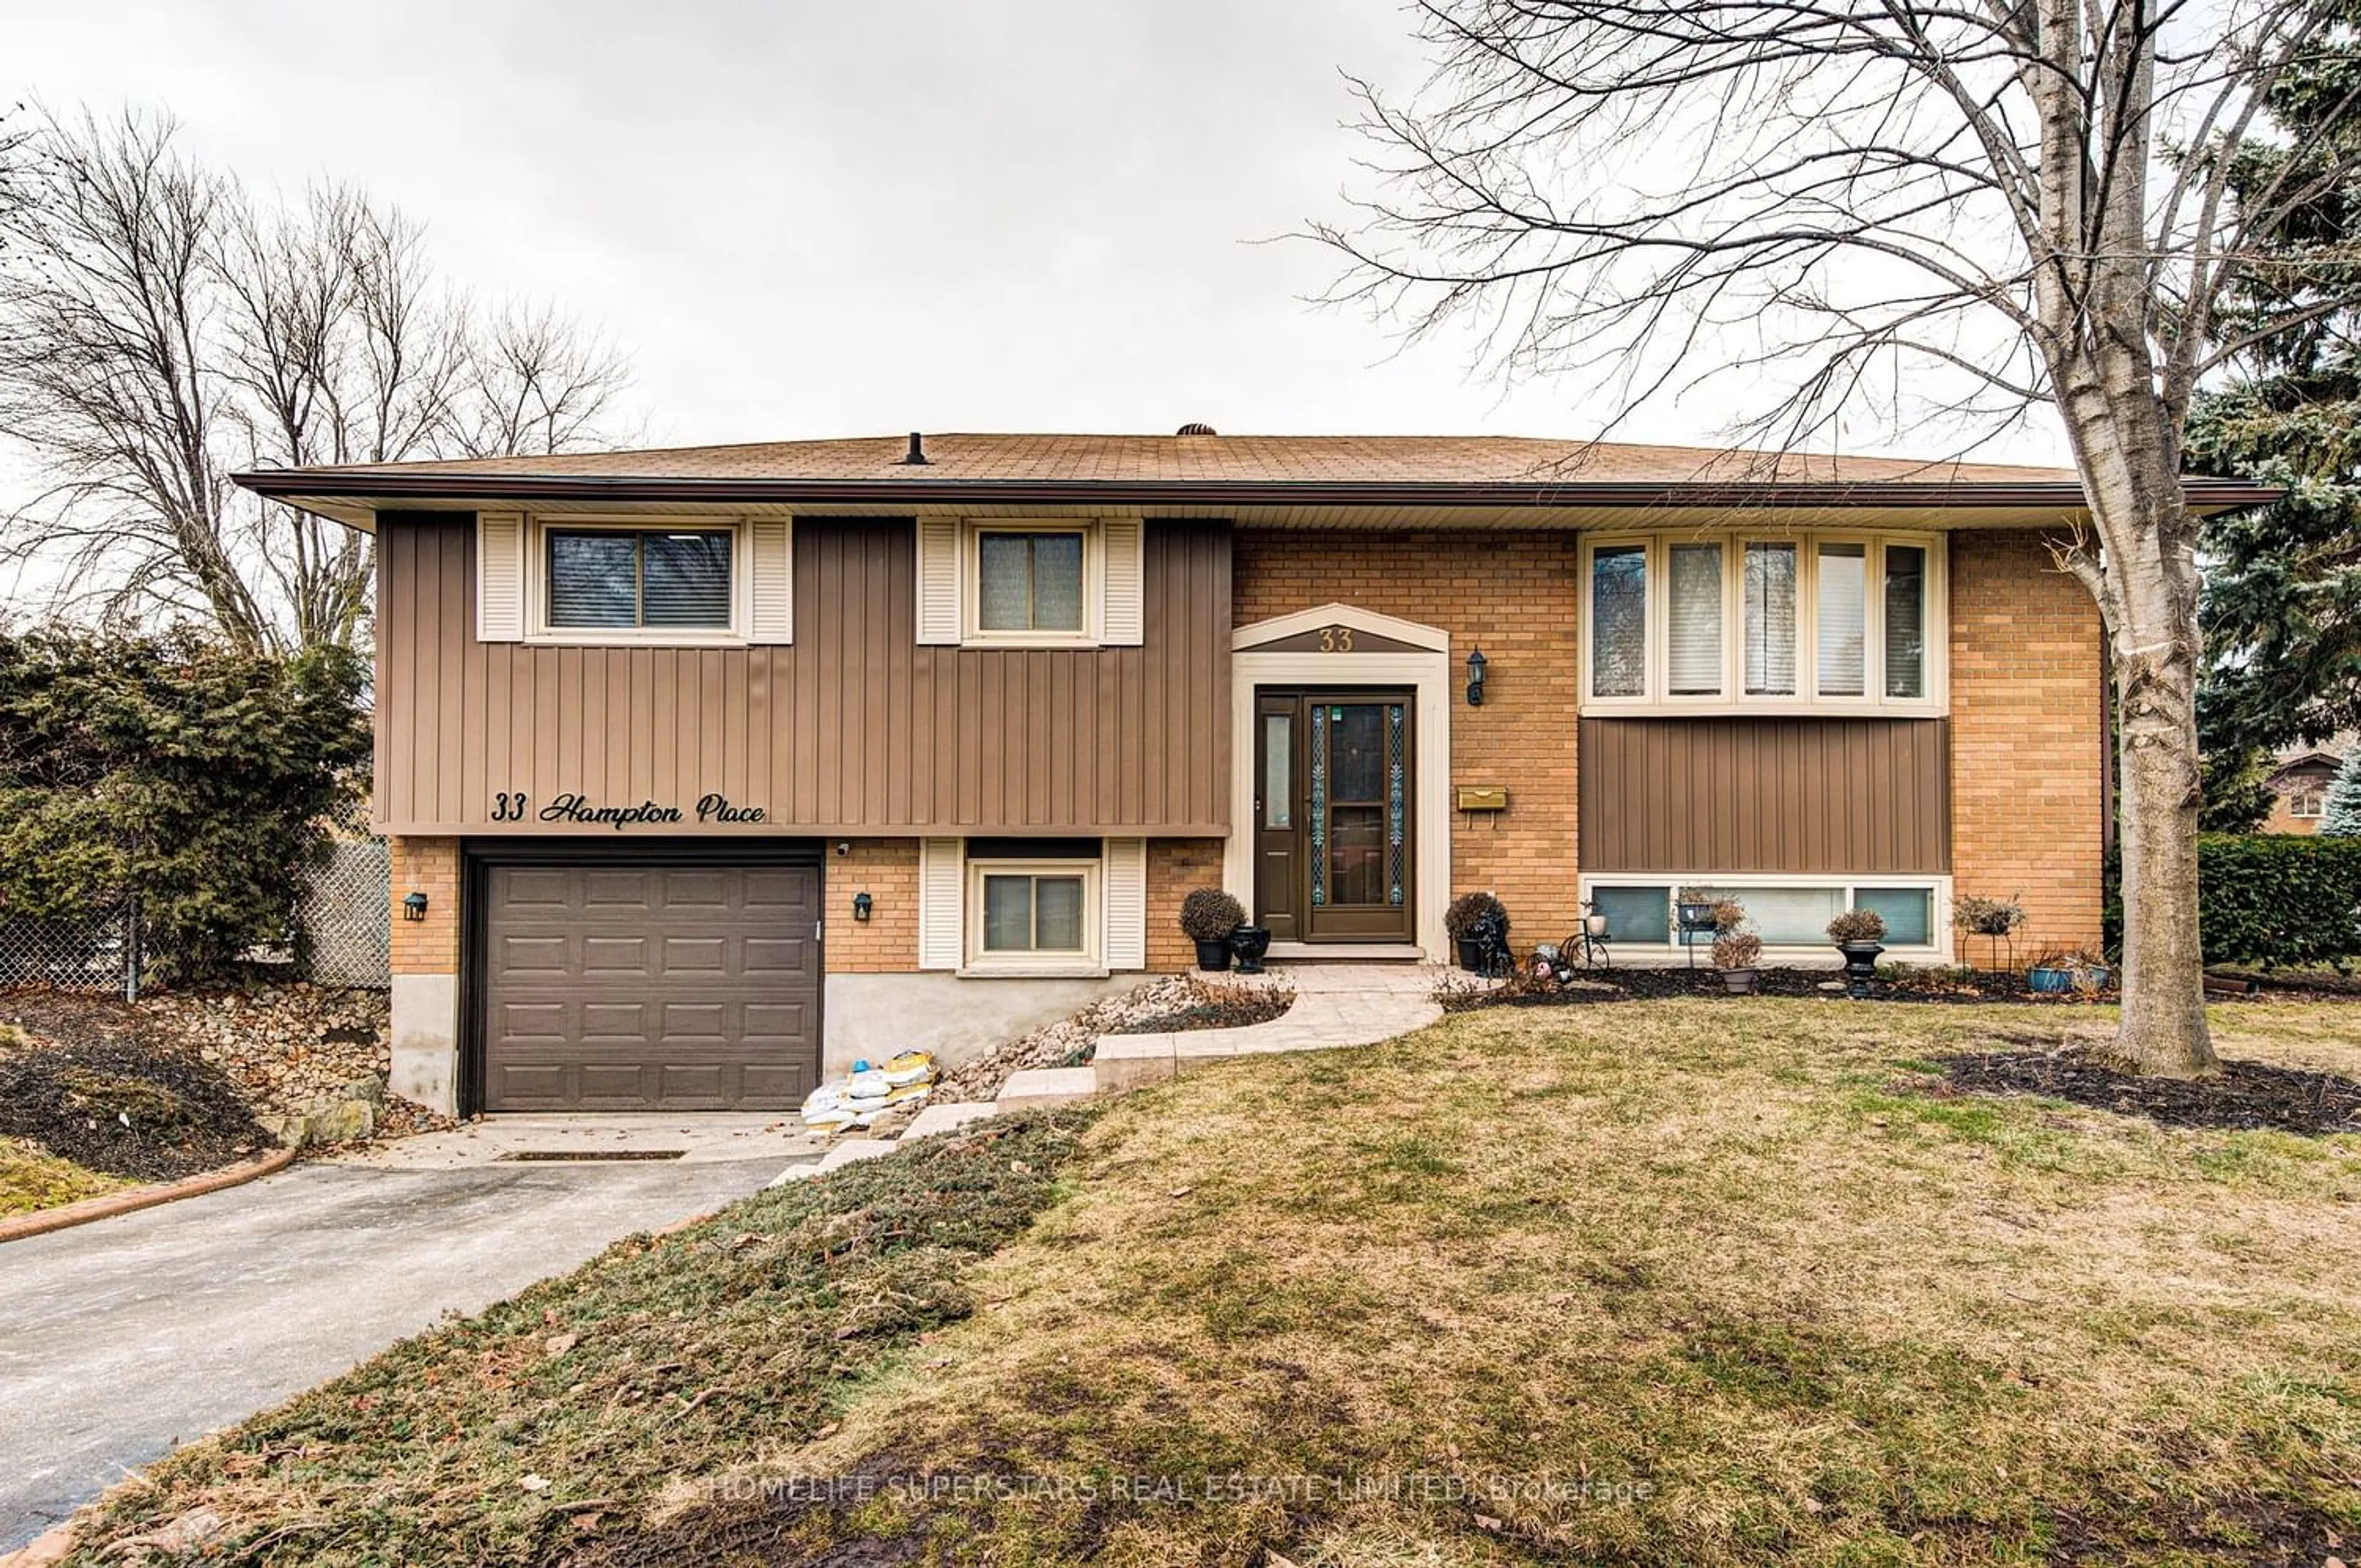 Home with brick exterior material for 33 Hampton Pl, Kitchener Ontario N2B 2S4